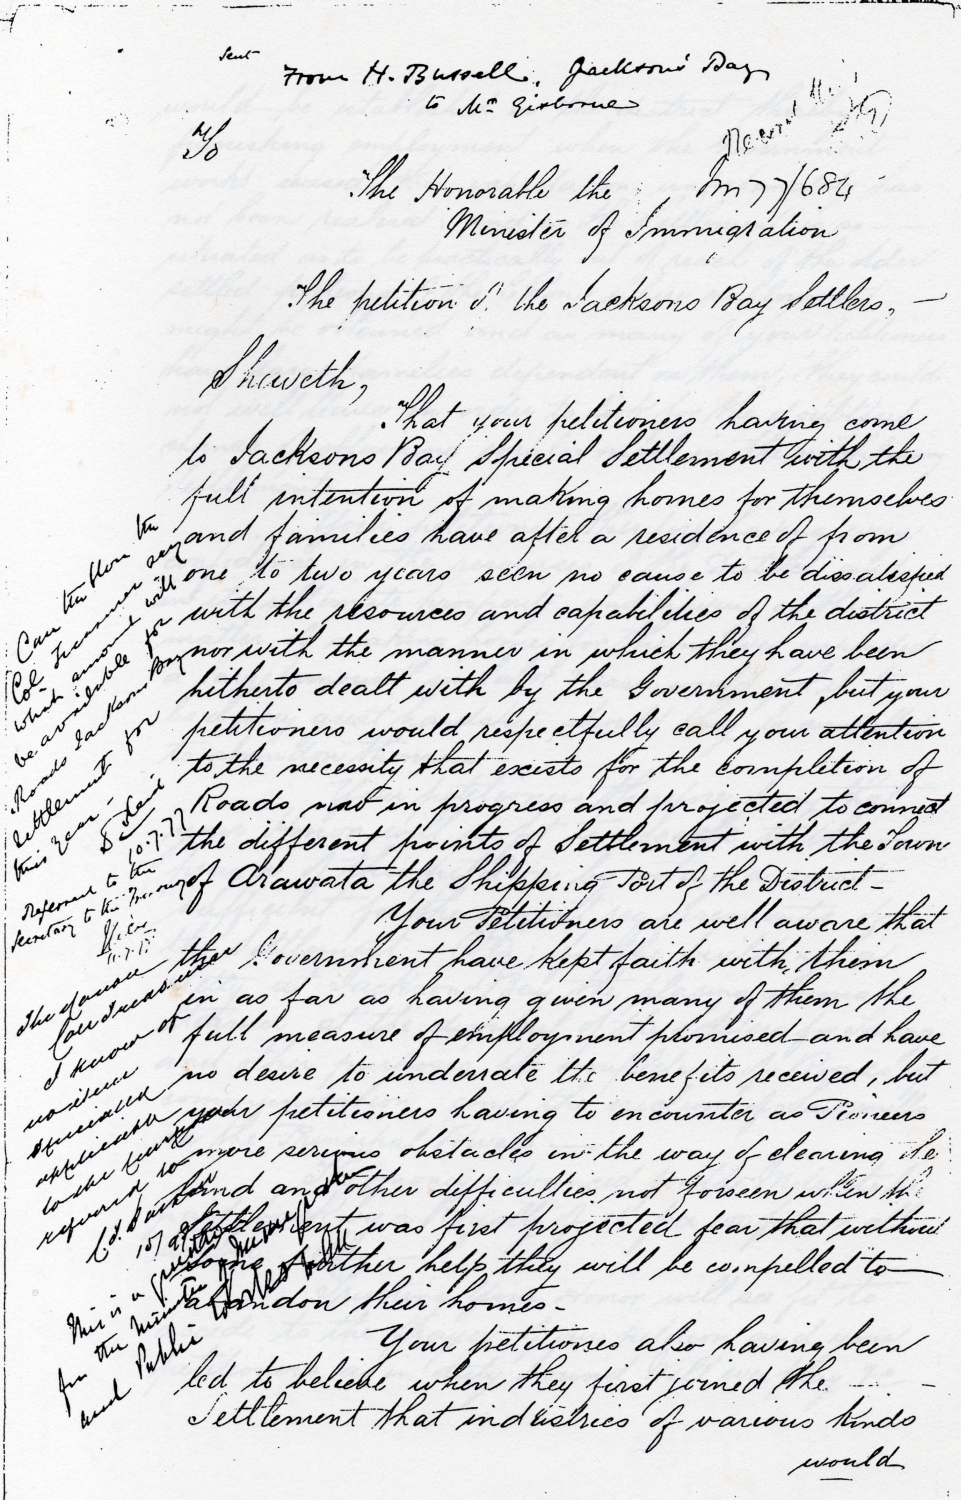 First page of the 
petition, neat handwriting, with notes scribbled in the margins.